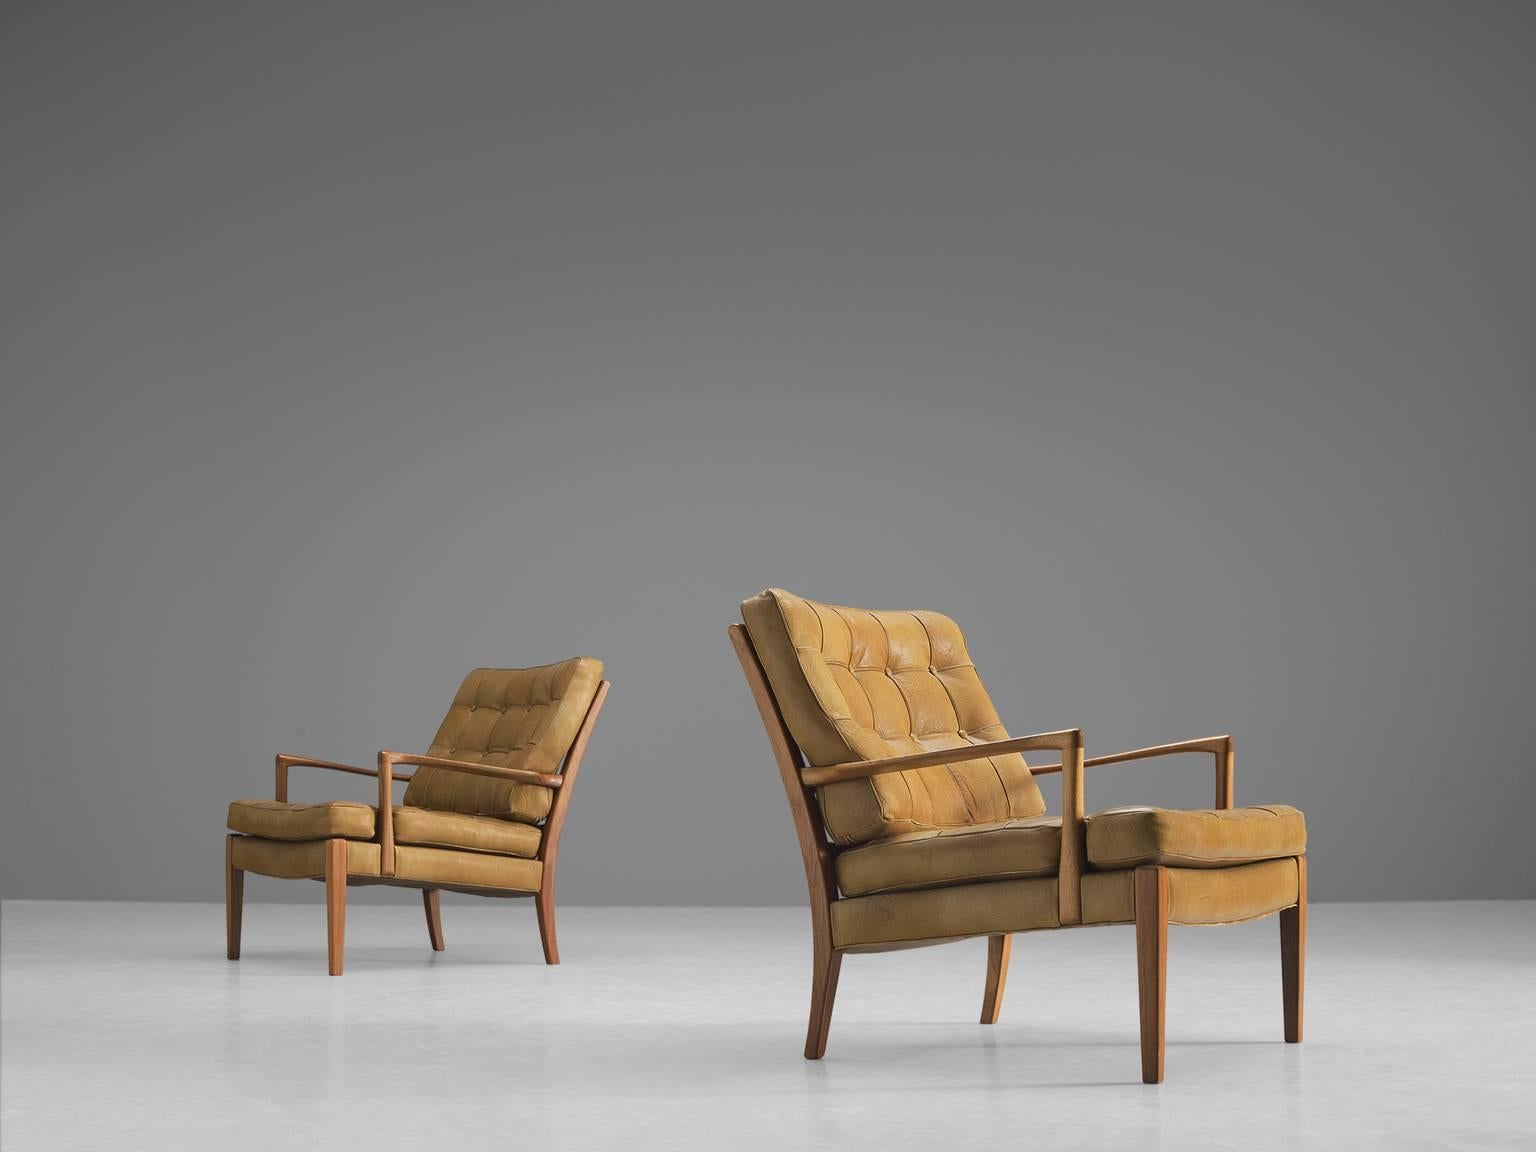 Two easy chairs, in brown, cognac leather and teak, by Arne Norell, Sweden, 1960s. 

Elegant armchairs with quilted light camel brown buffalo leather. The tufted cushions show a stunning patina, which gives these chairs a vibrant appearance. The